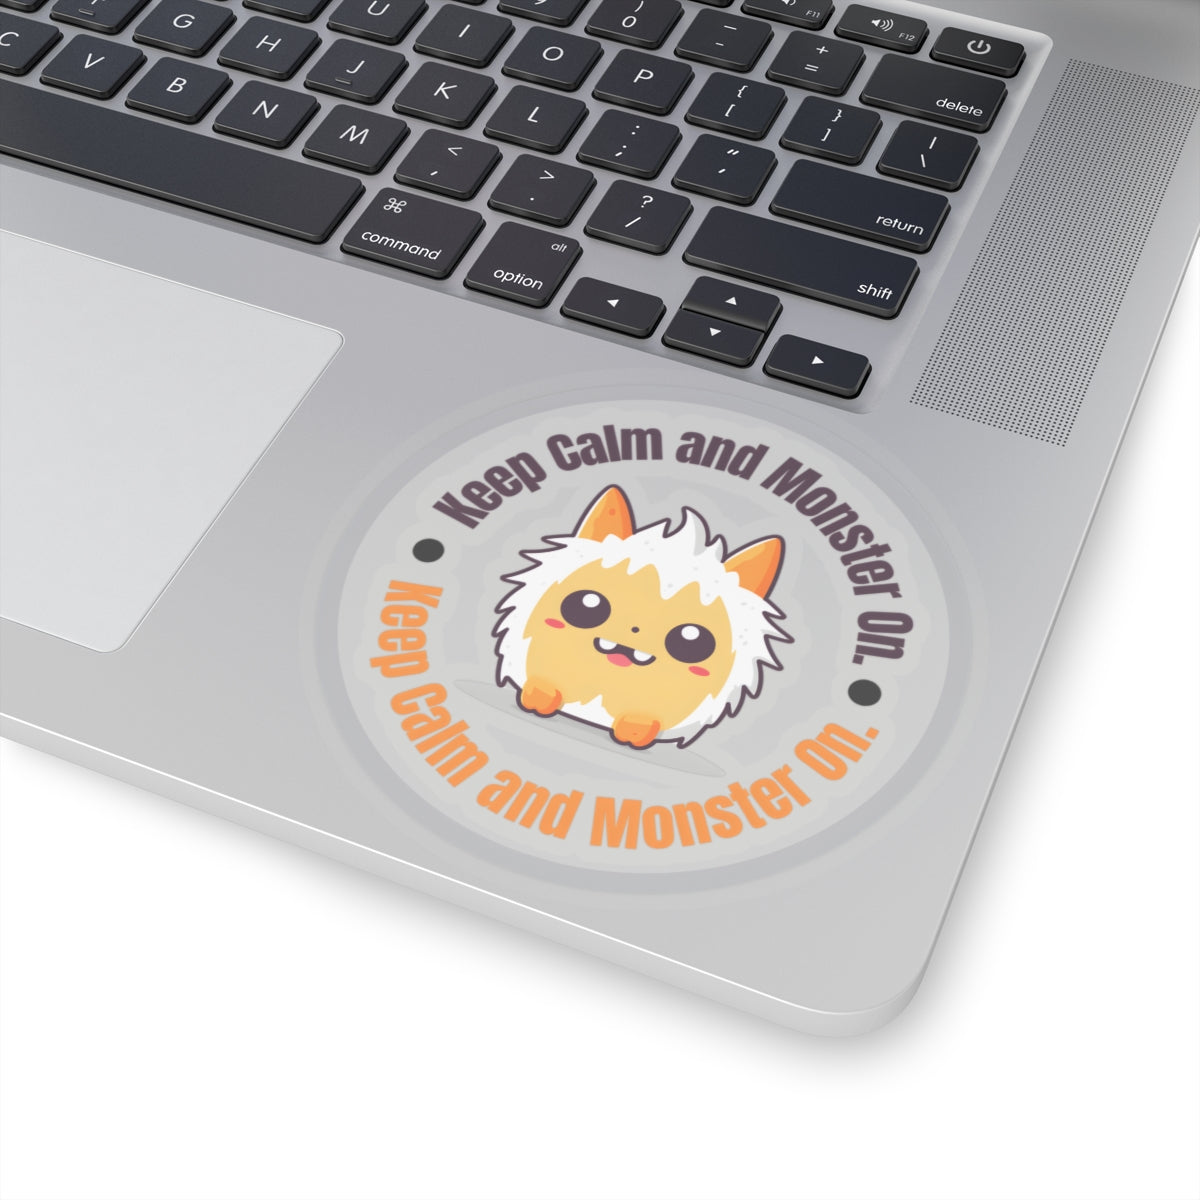 Keep calm and monster on Kiss-cut Stickers